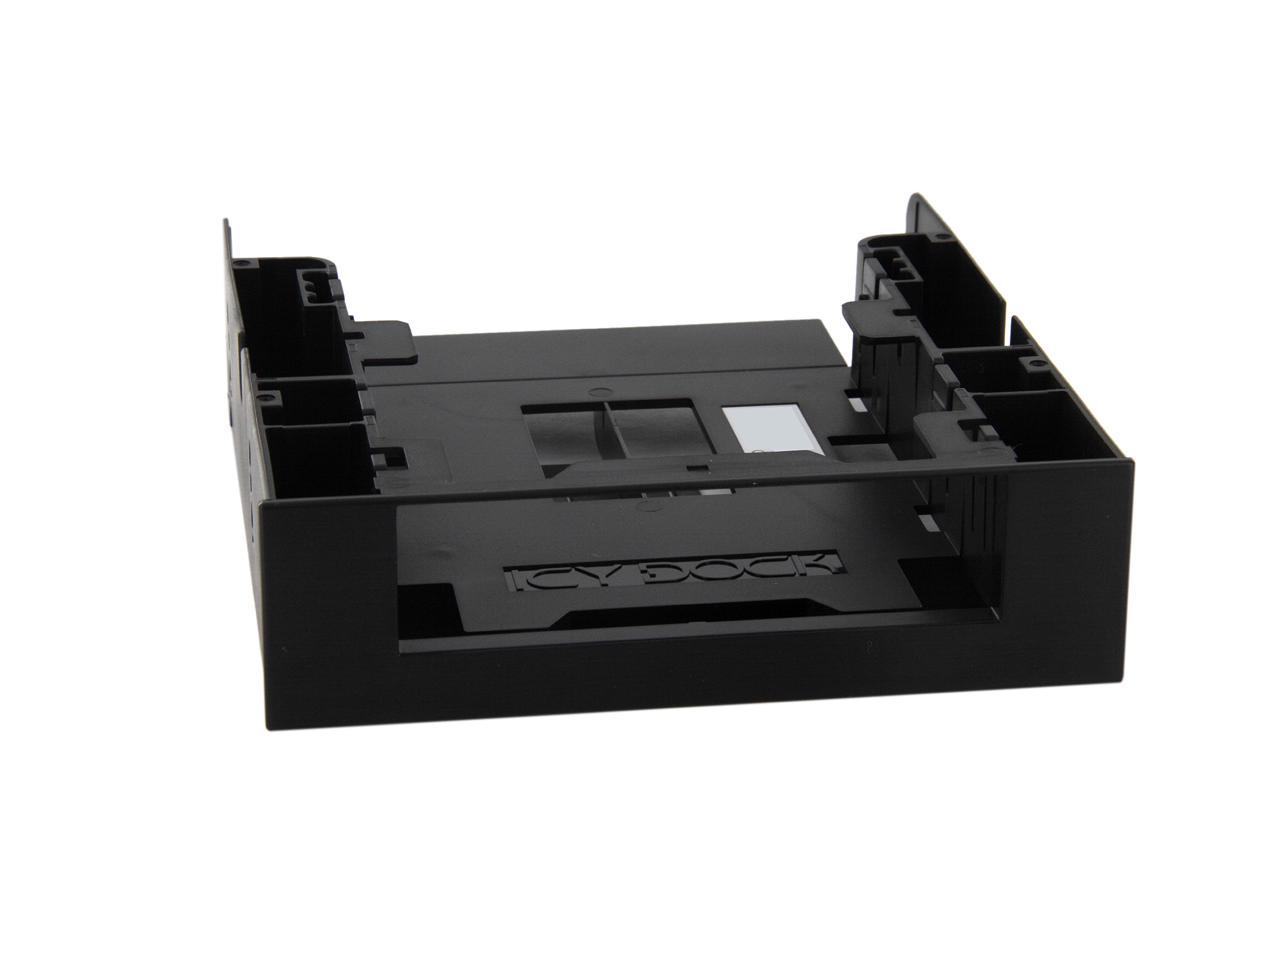 3.5 Floppy-Drive Mounting Bracket,Compatible with Standard 5.25 Bay of PC,Multifunctional Combination 5.25 to 2.5